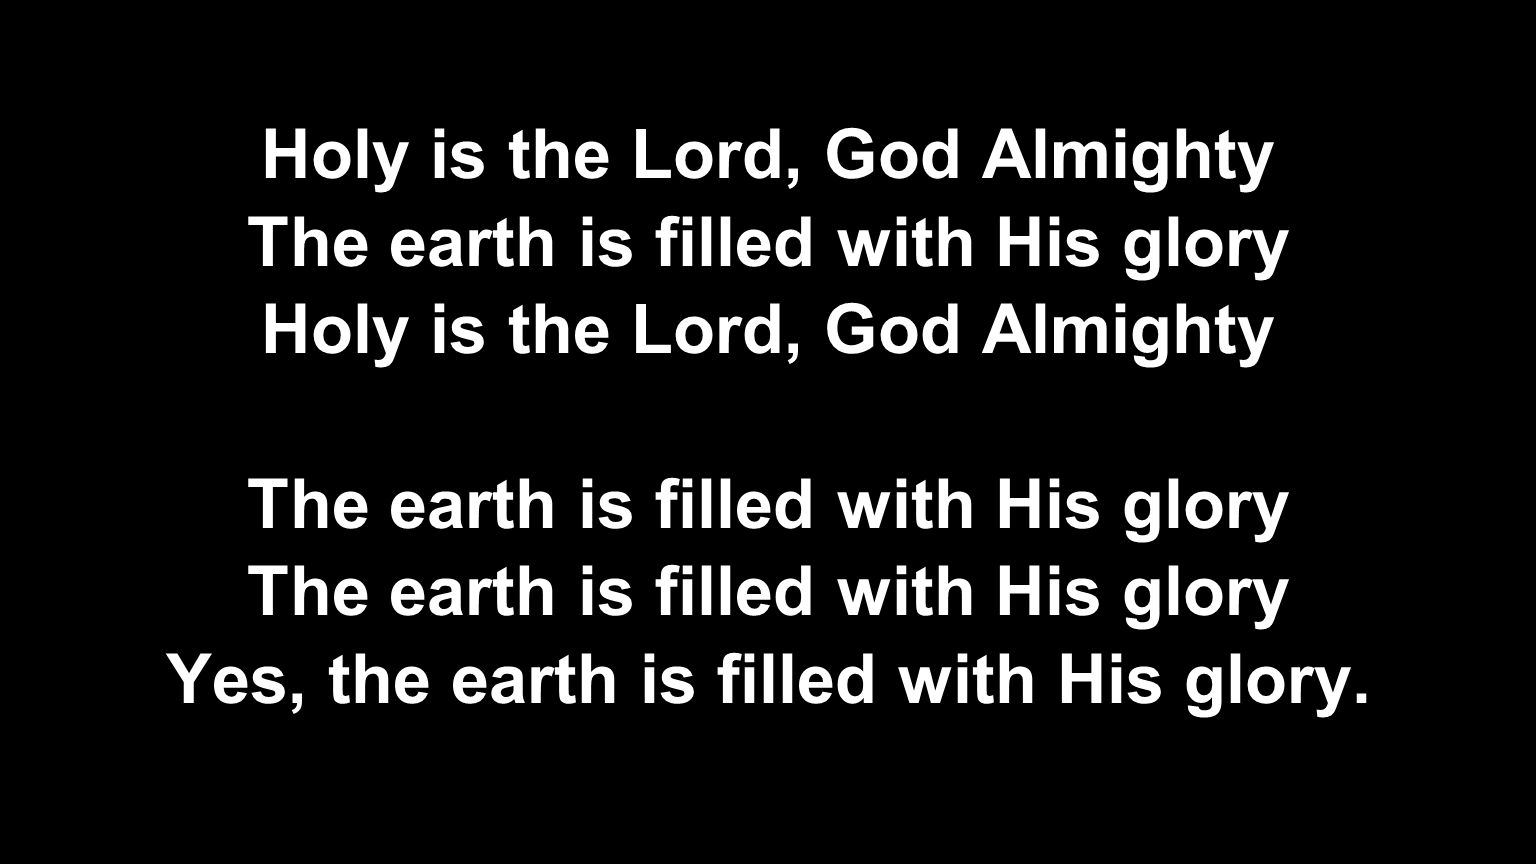 Holy is the Lord, God Almighty The earth is filled with His glory Holy is the Lord, God Almighty The earth is filled with His glory Yes, the earth is filled with His glory.